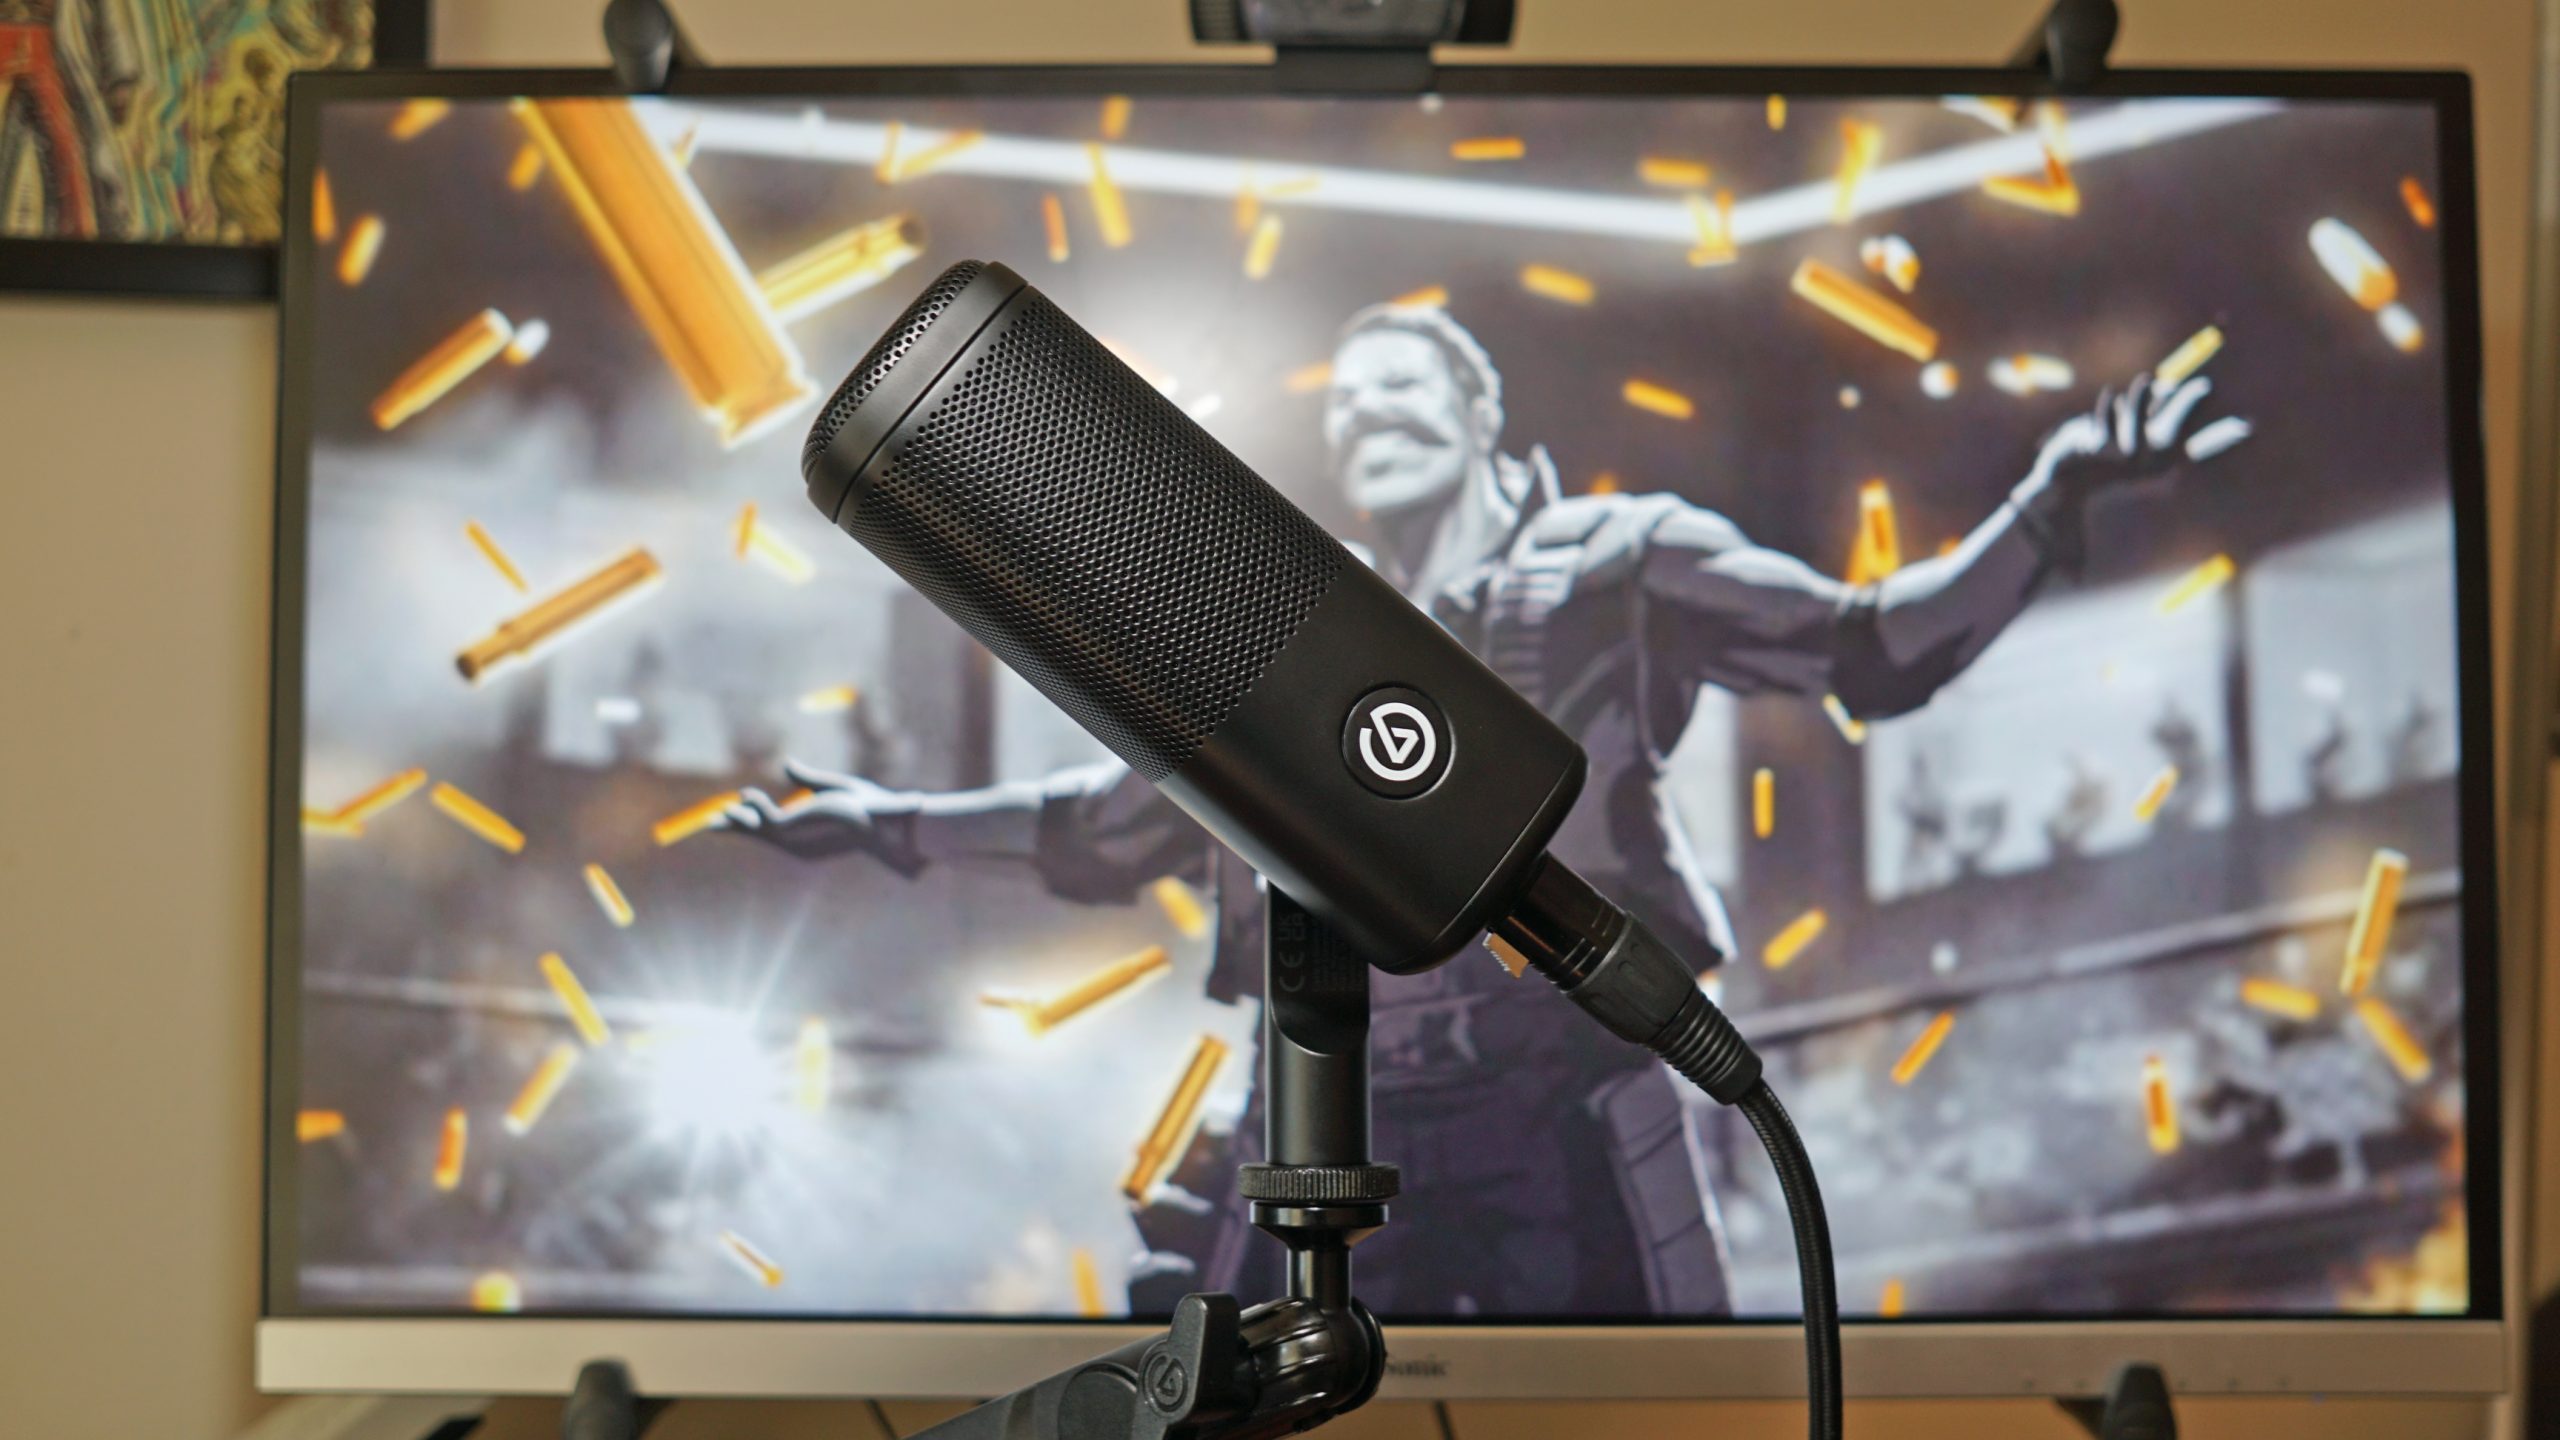 The Elgato Wave DX sits on a microphone arm in front of a Viewsonic monitor displaying Apex Legends.